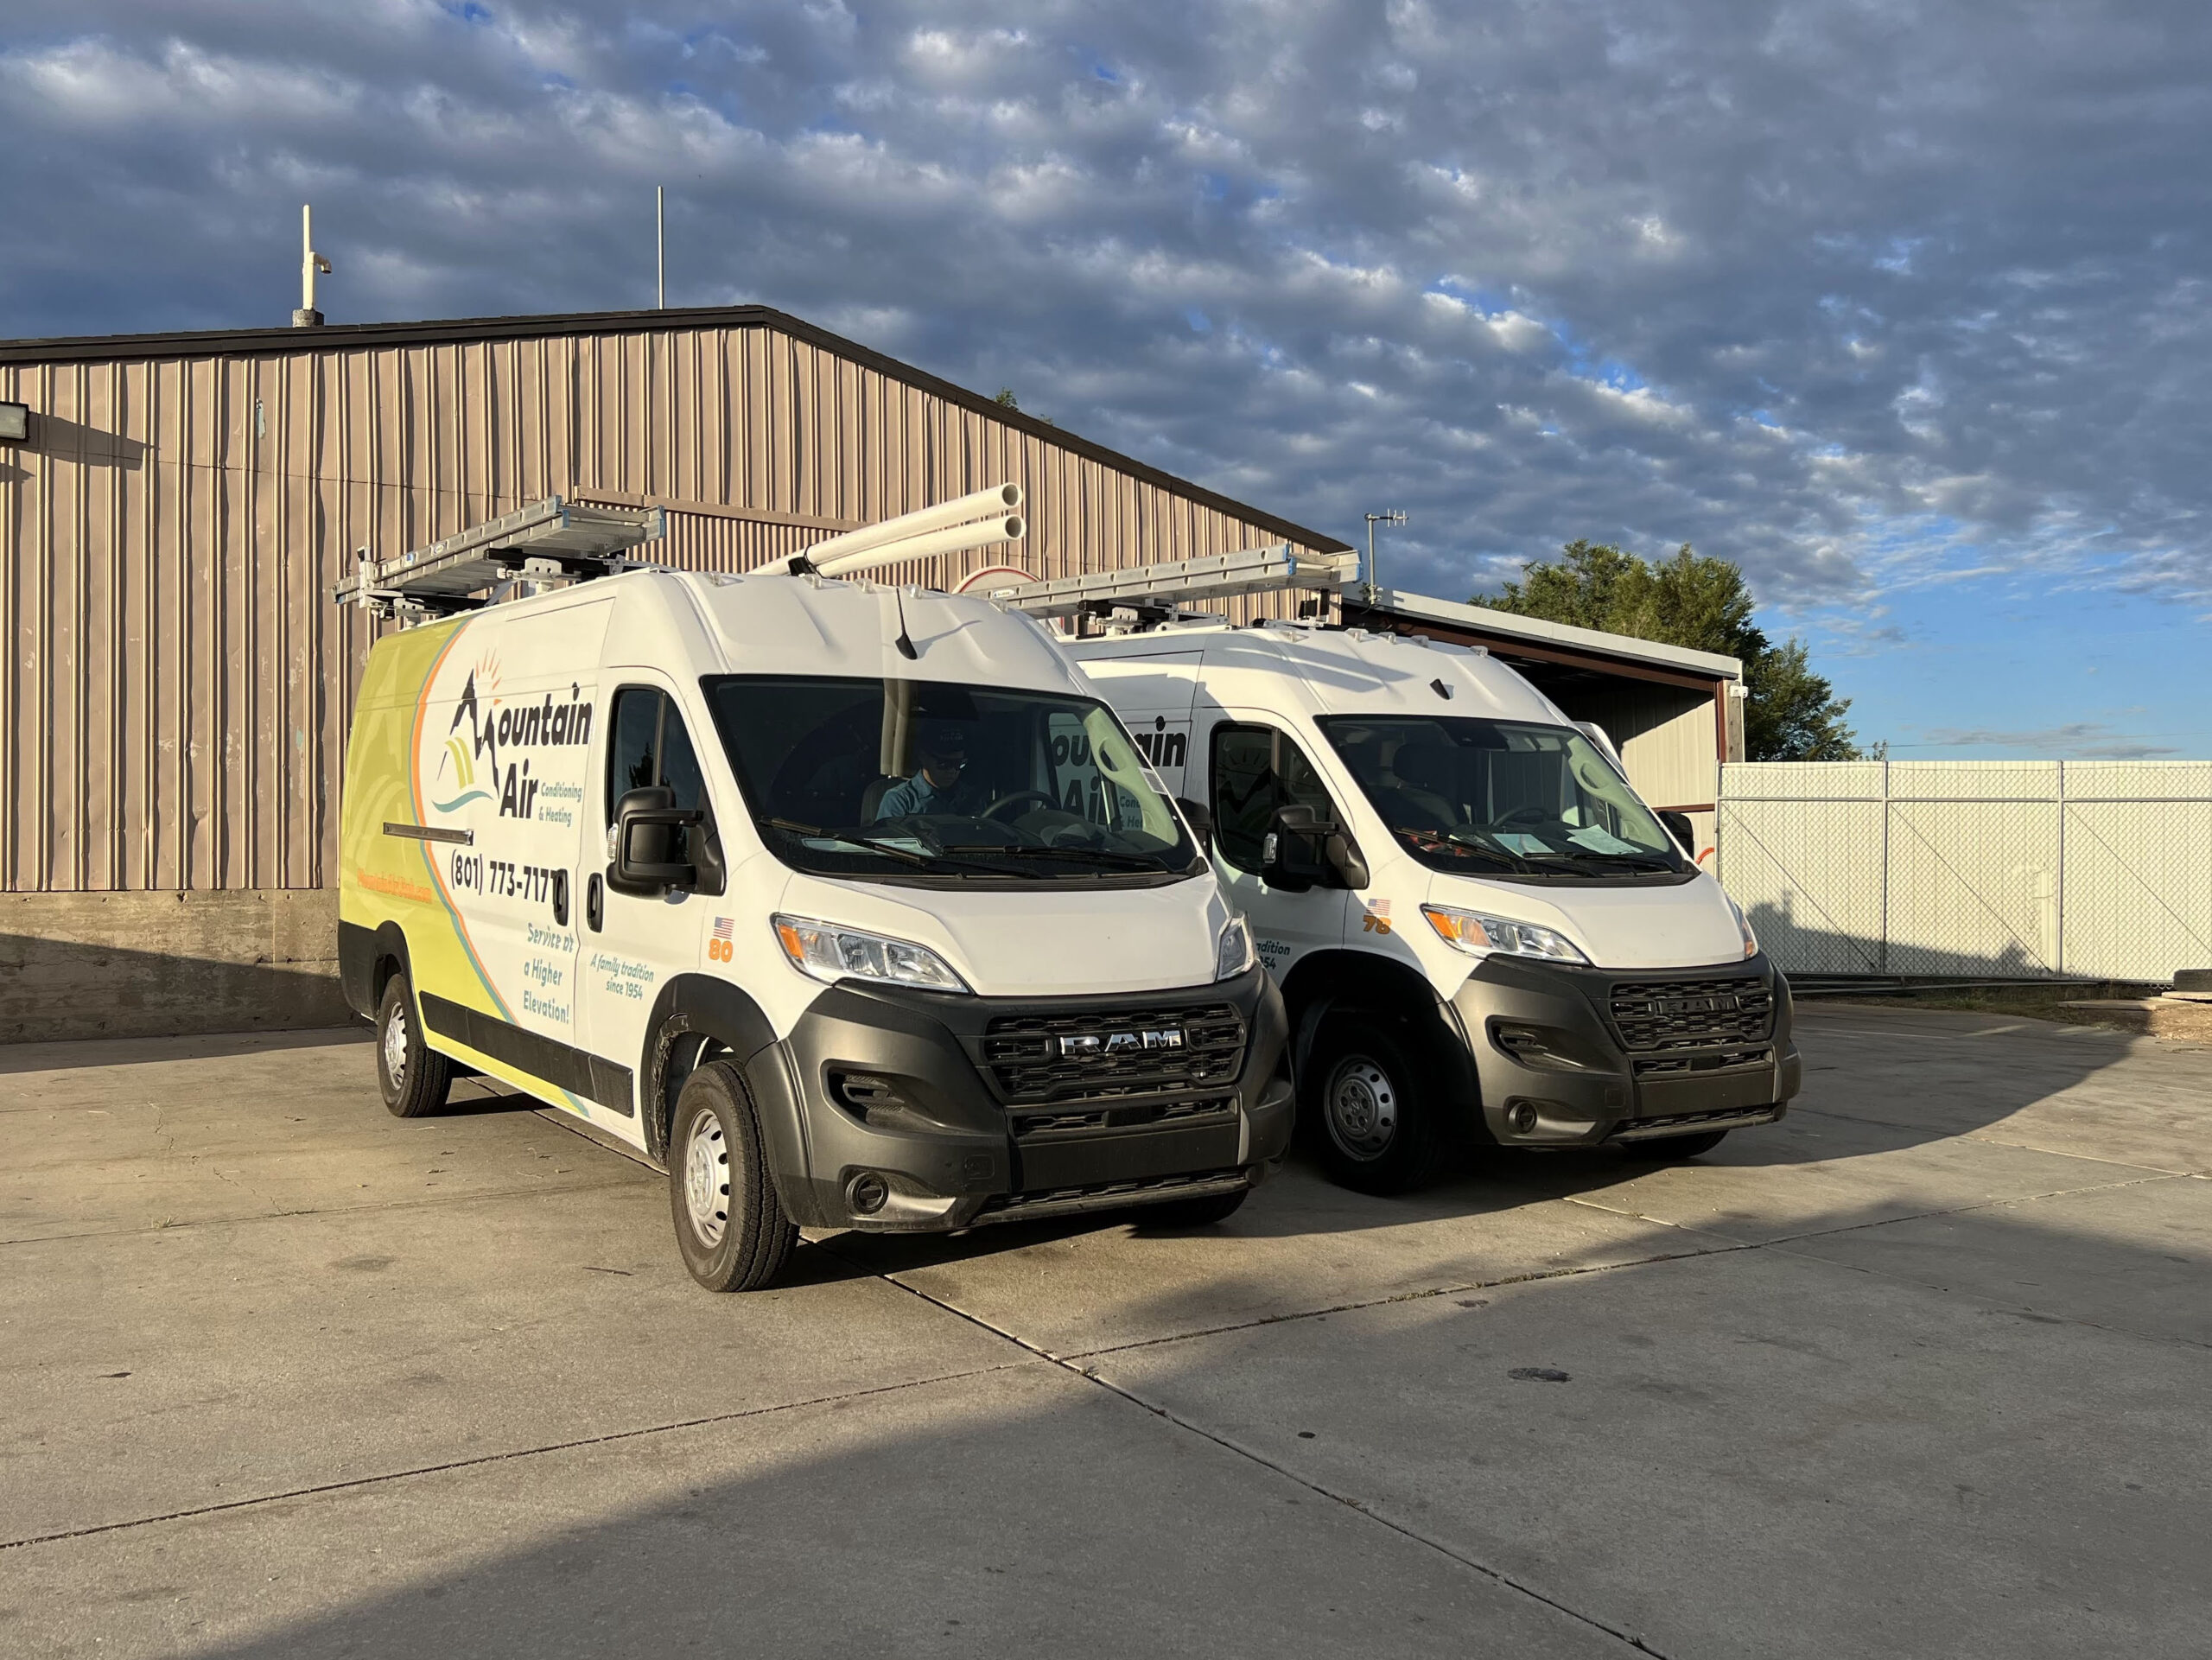 Two Mountain Air service trucks parked side-by-side in front of a warehouse.